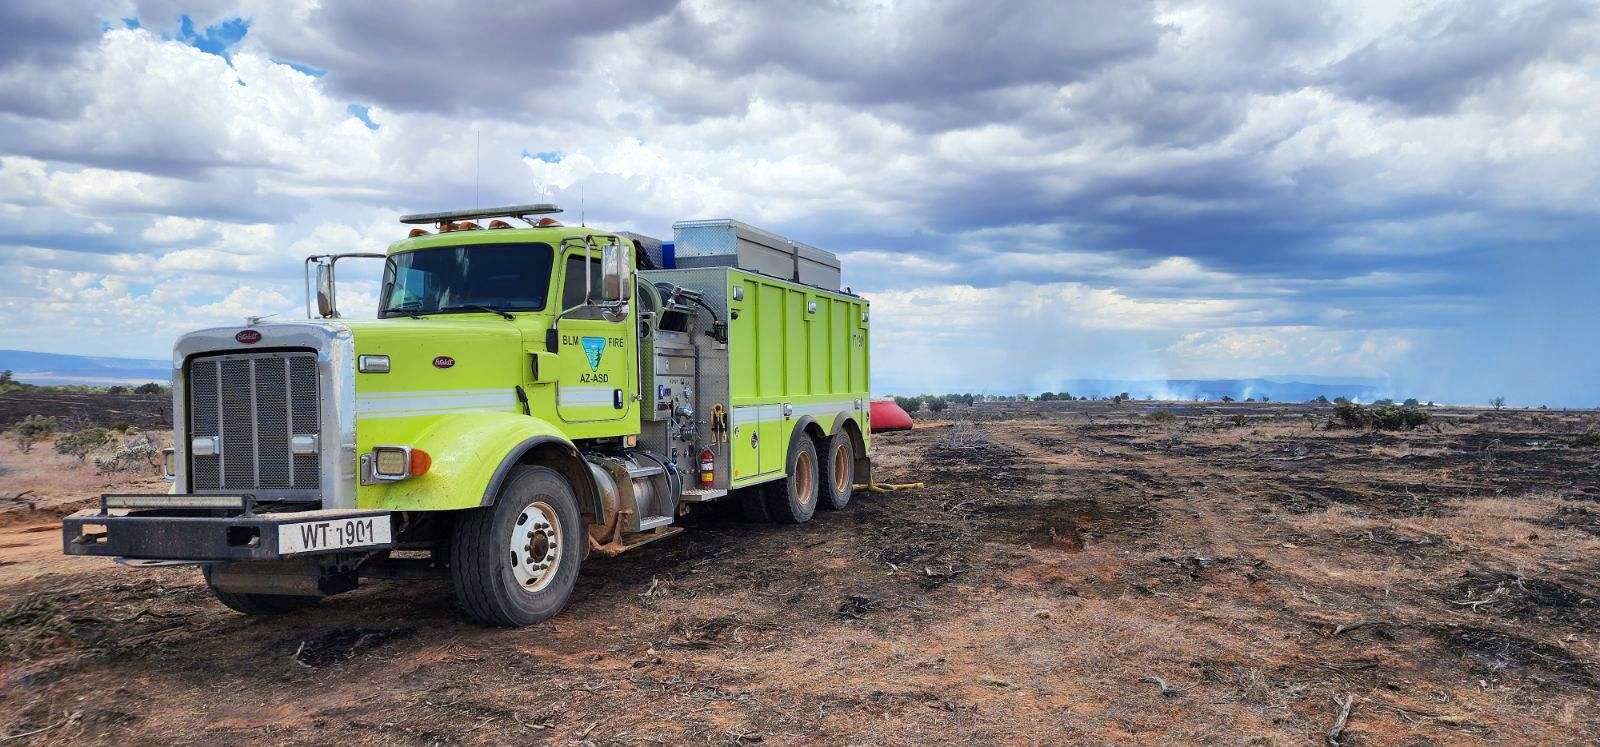 A lime green wildland fire fighter vehicle or water tender truck is parked on a desert landscape scorched black by a wildland fire. An orange "pumpkin" or mobile water dip tank sits in the background behind the truck.